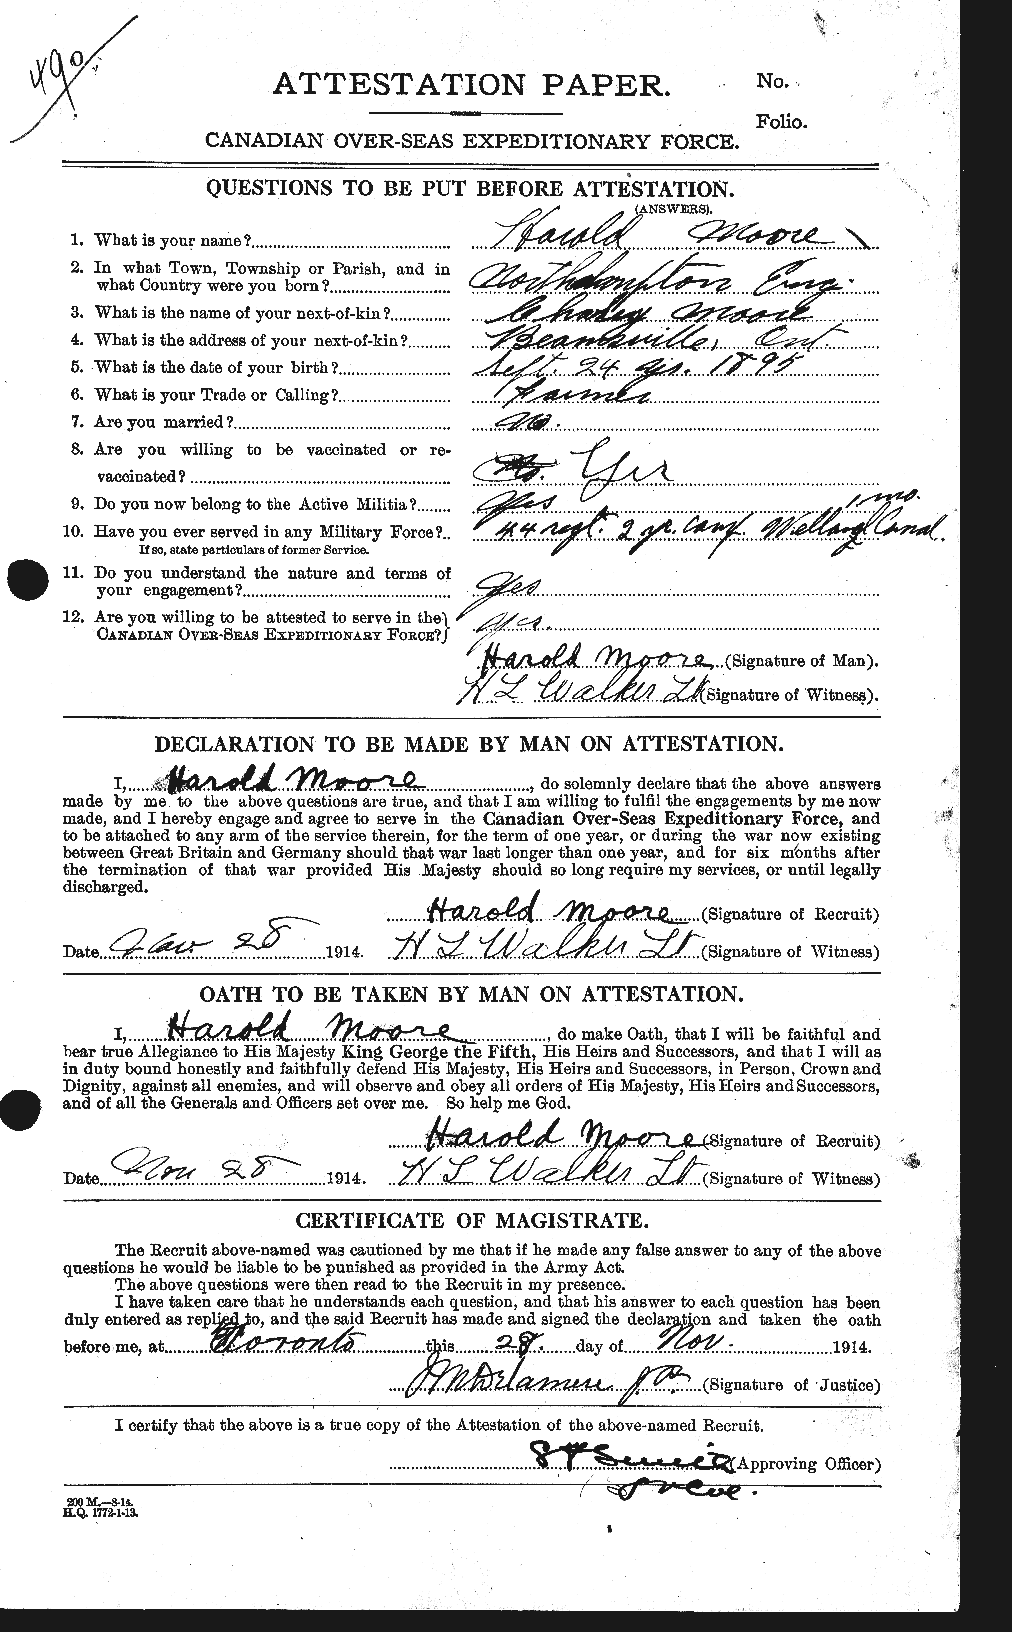 Personnel Records of the First World War - CEF 502053a